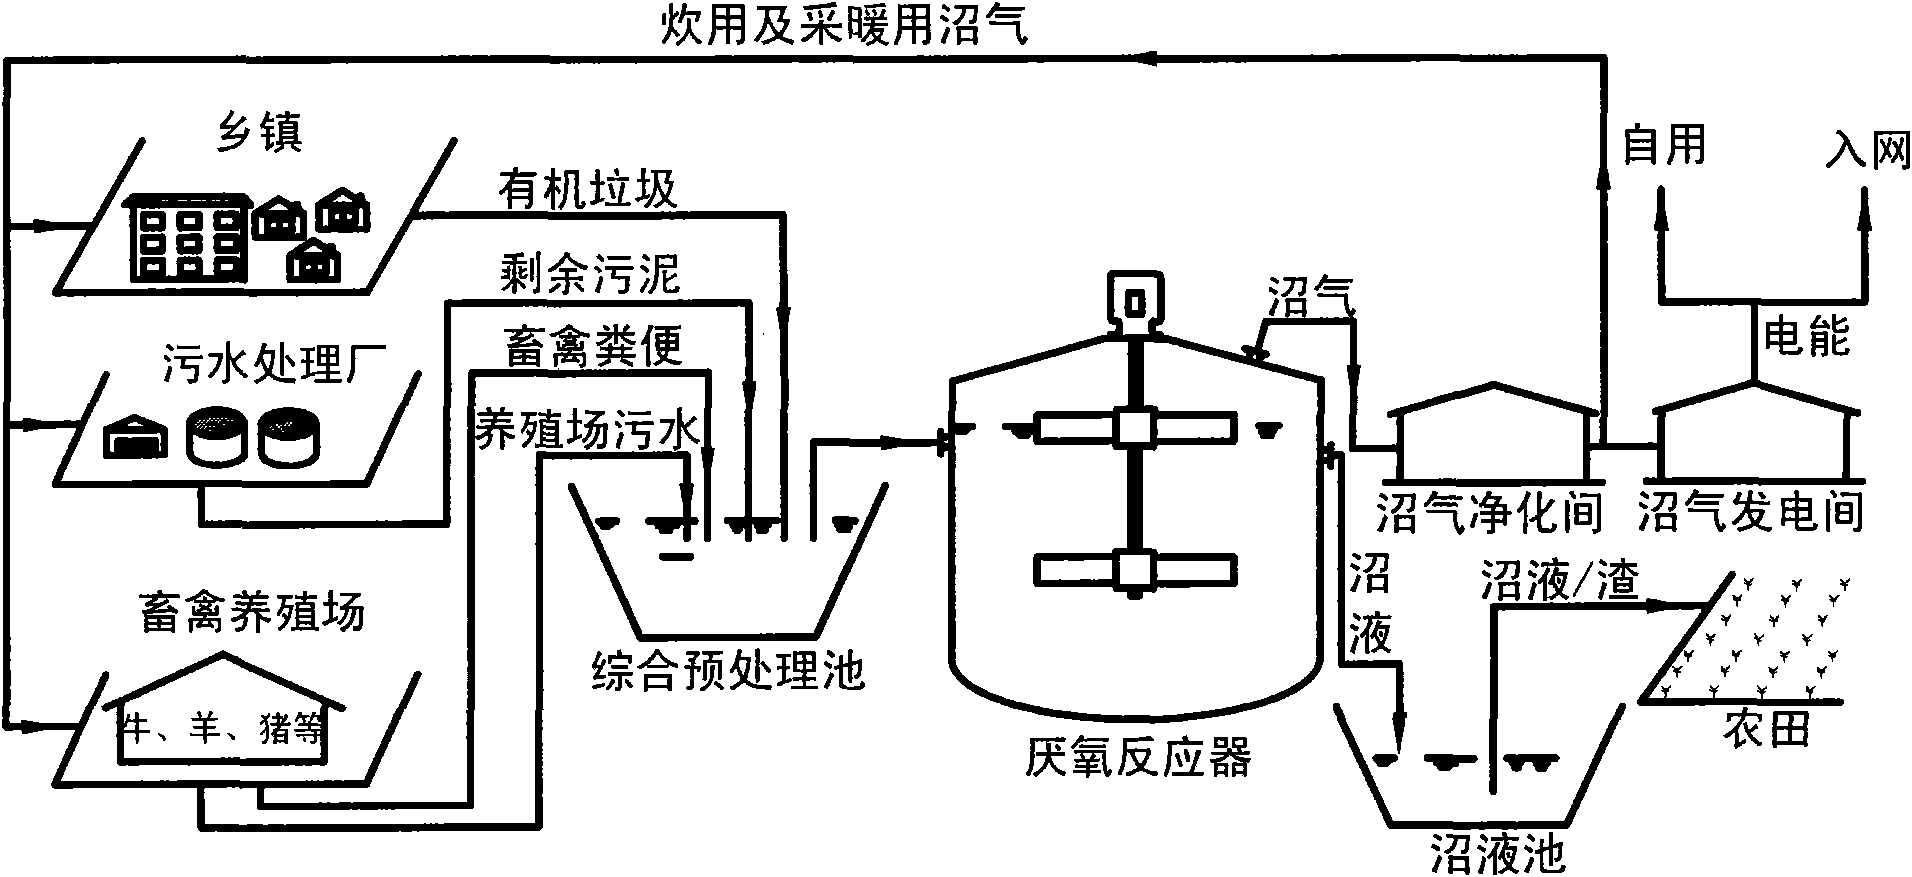 Method for producing biogas by garbage union fermentation